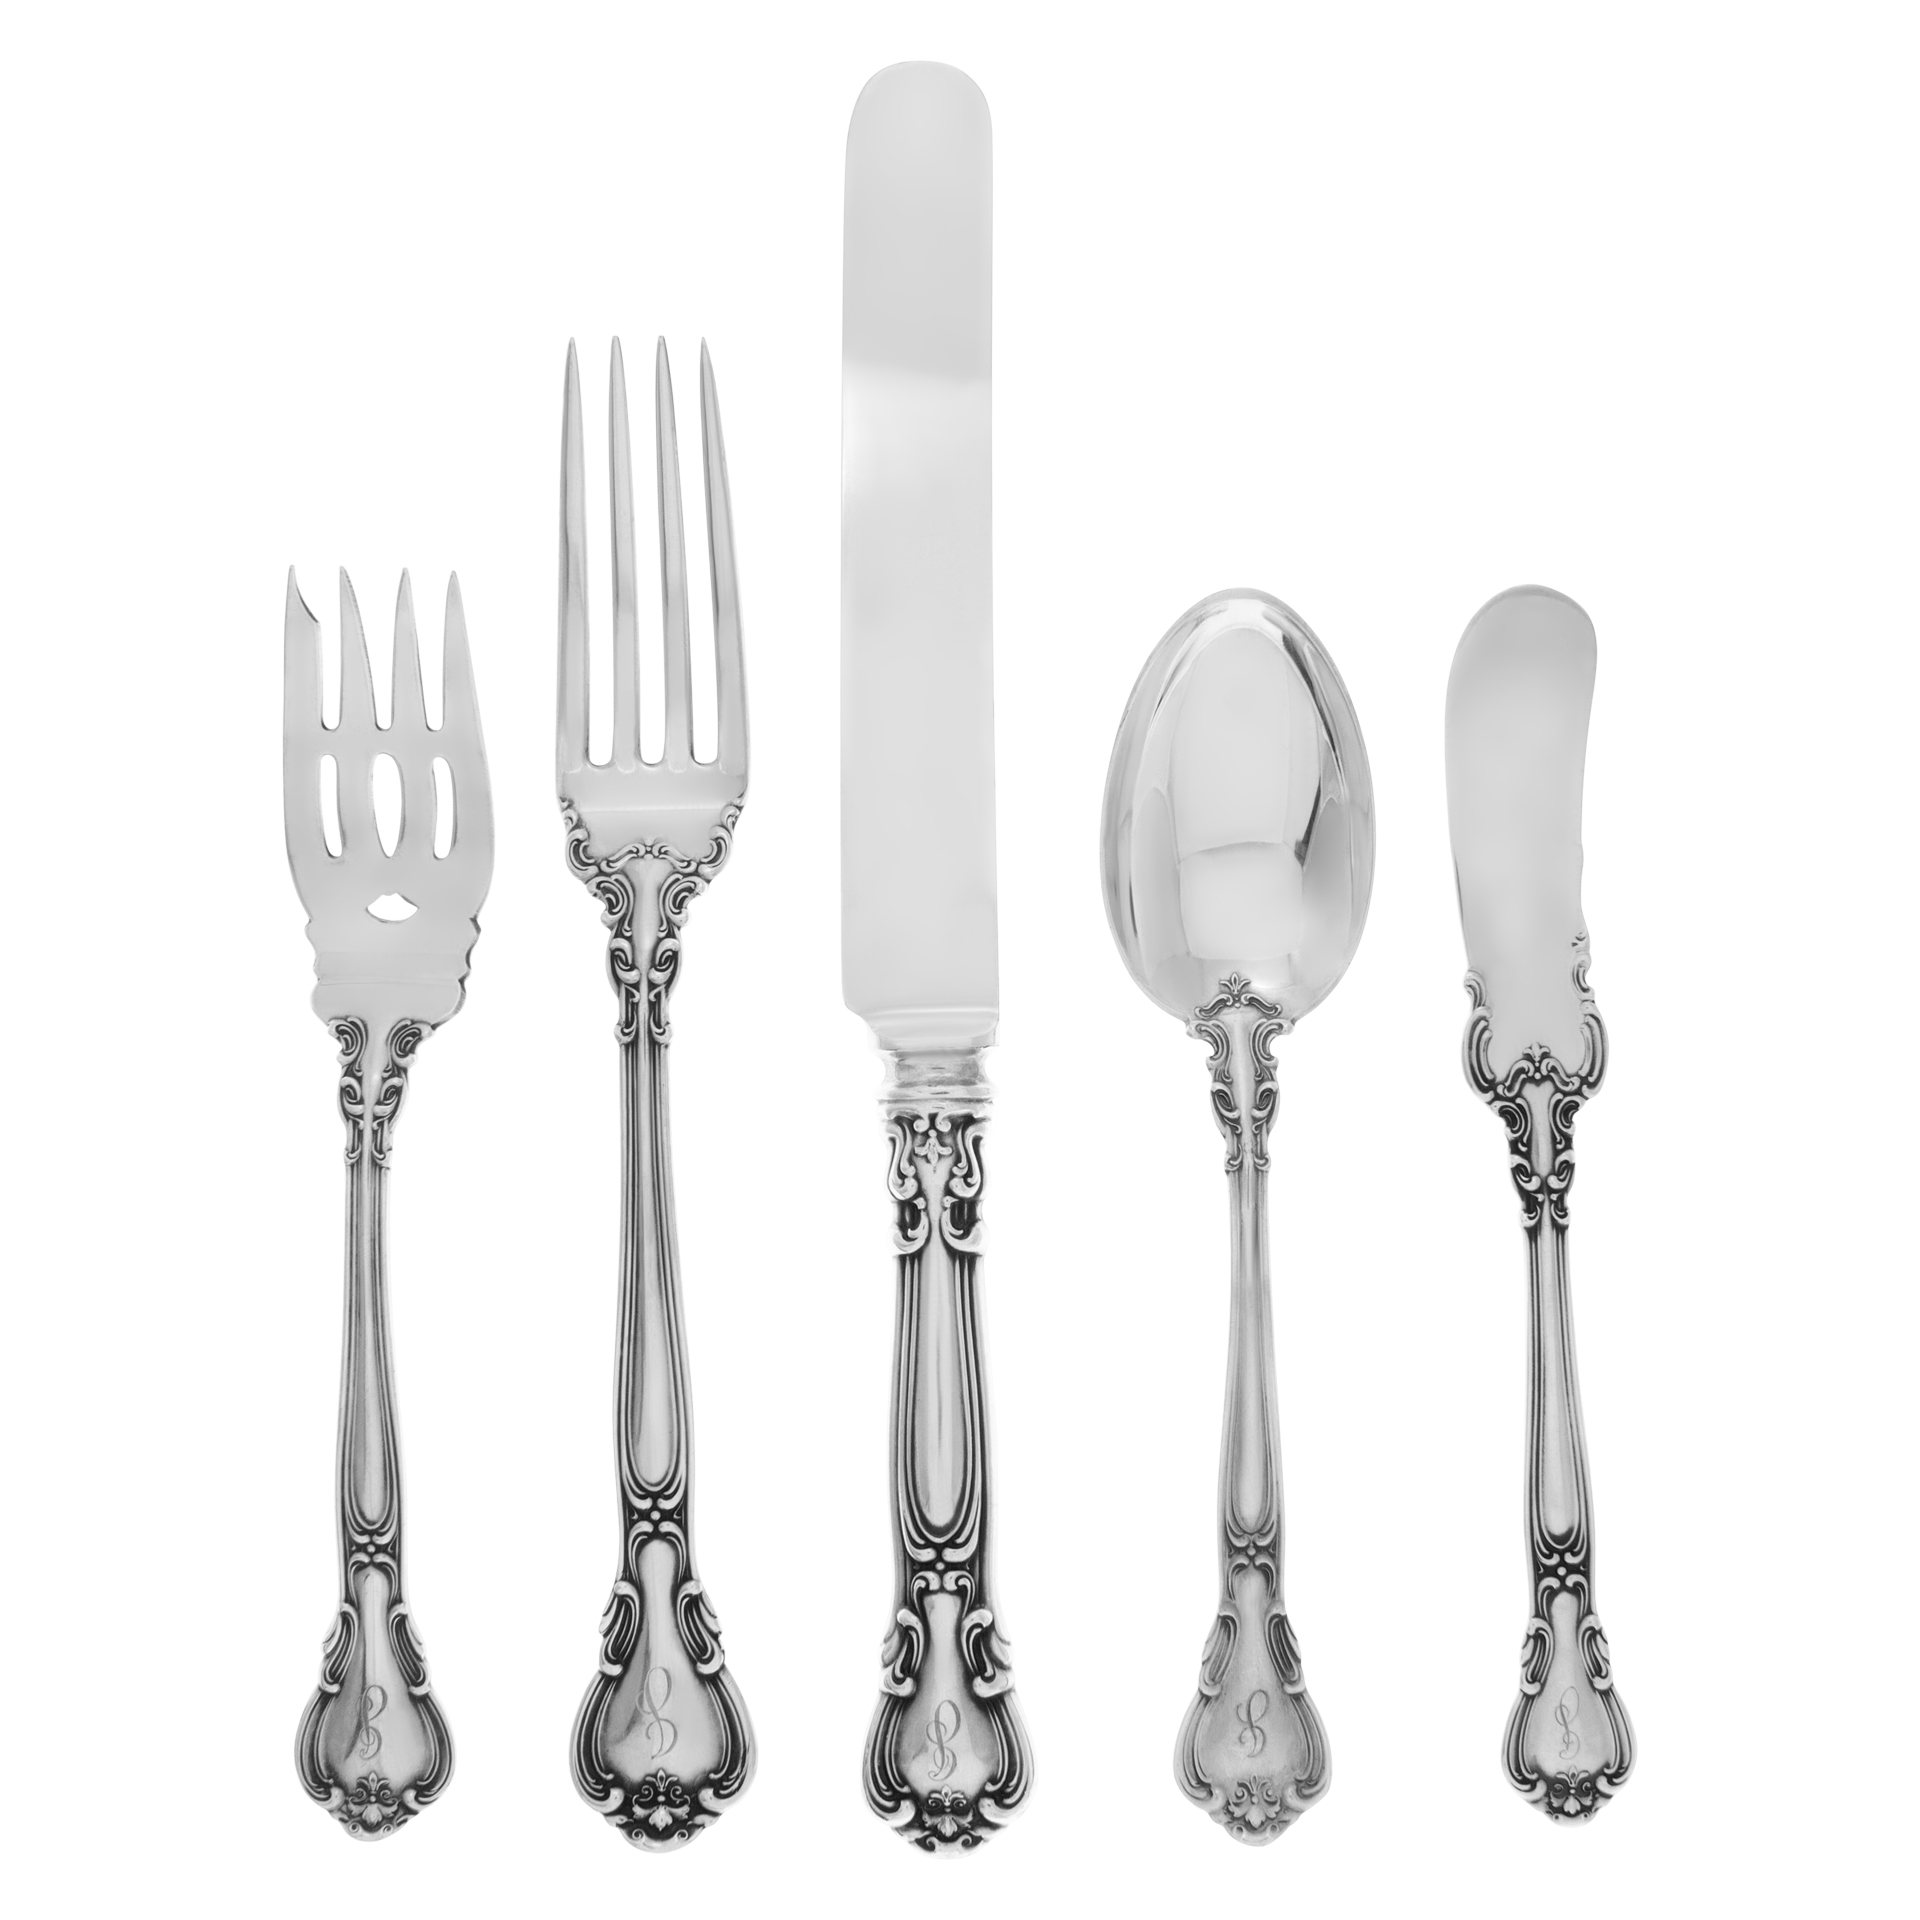 "CHANTILLY" antique sterling silver flatware patented 1895 by Gorham. 93 pieces total.